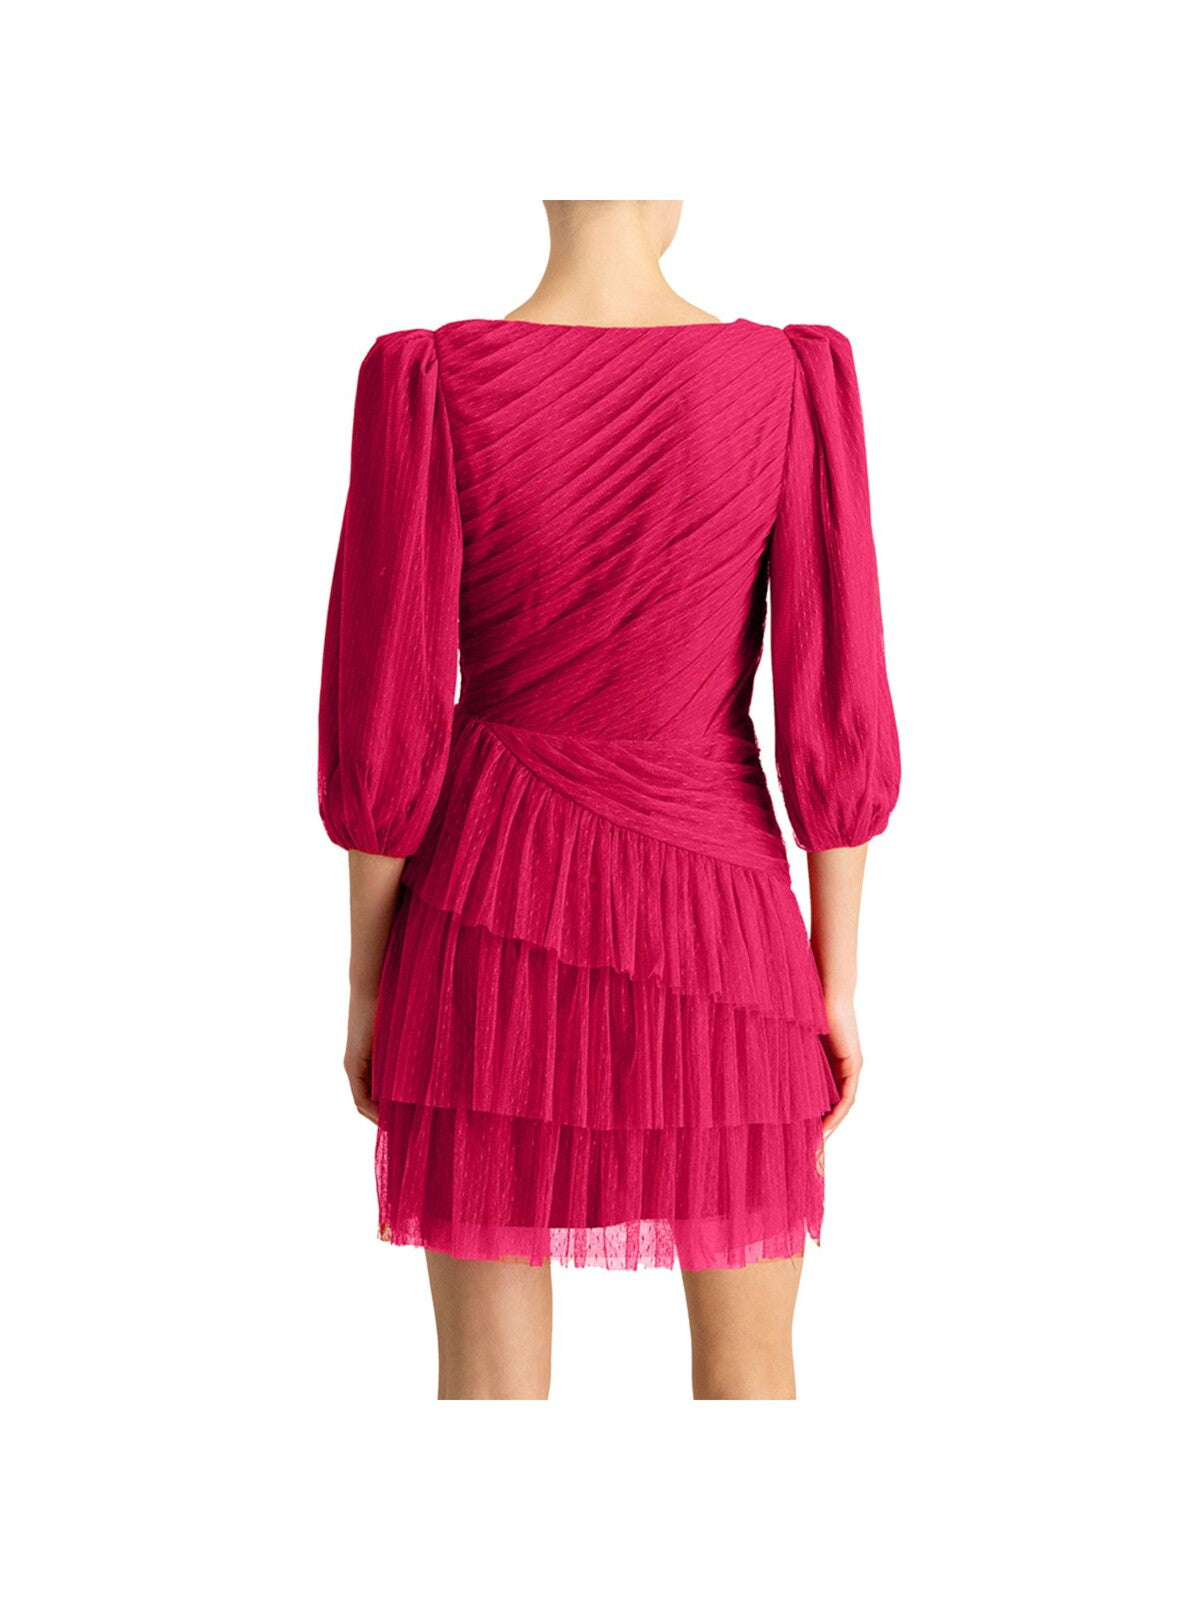 ML MONIQUE LHUILLIER Womens Red Zippered Textured Tiered Skirt Pleated Lined Balloon Sleeve V Neck Above The Knee Party Sheath Dress 0